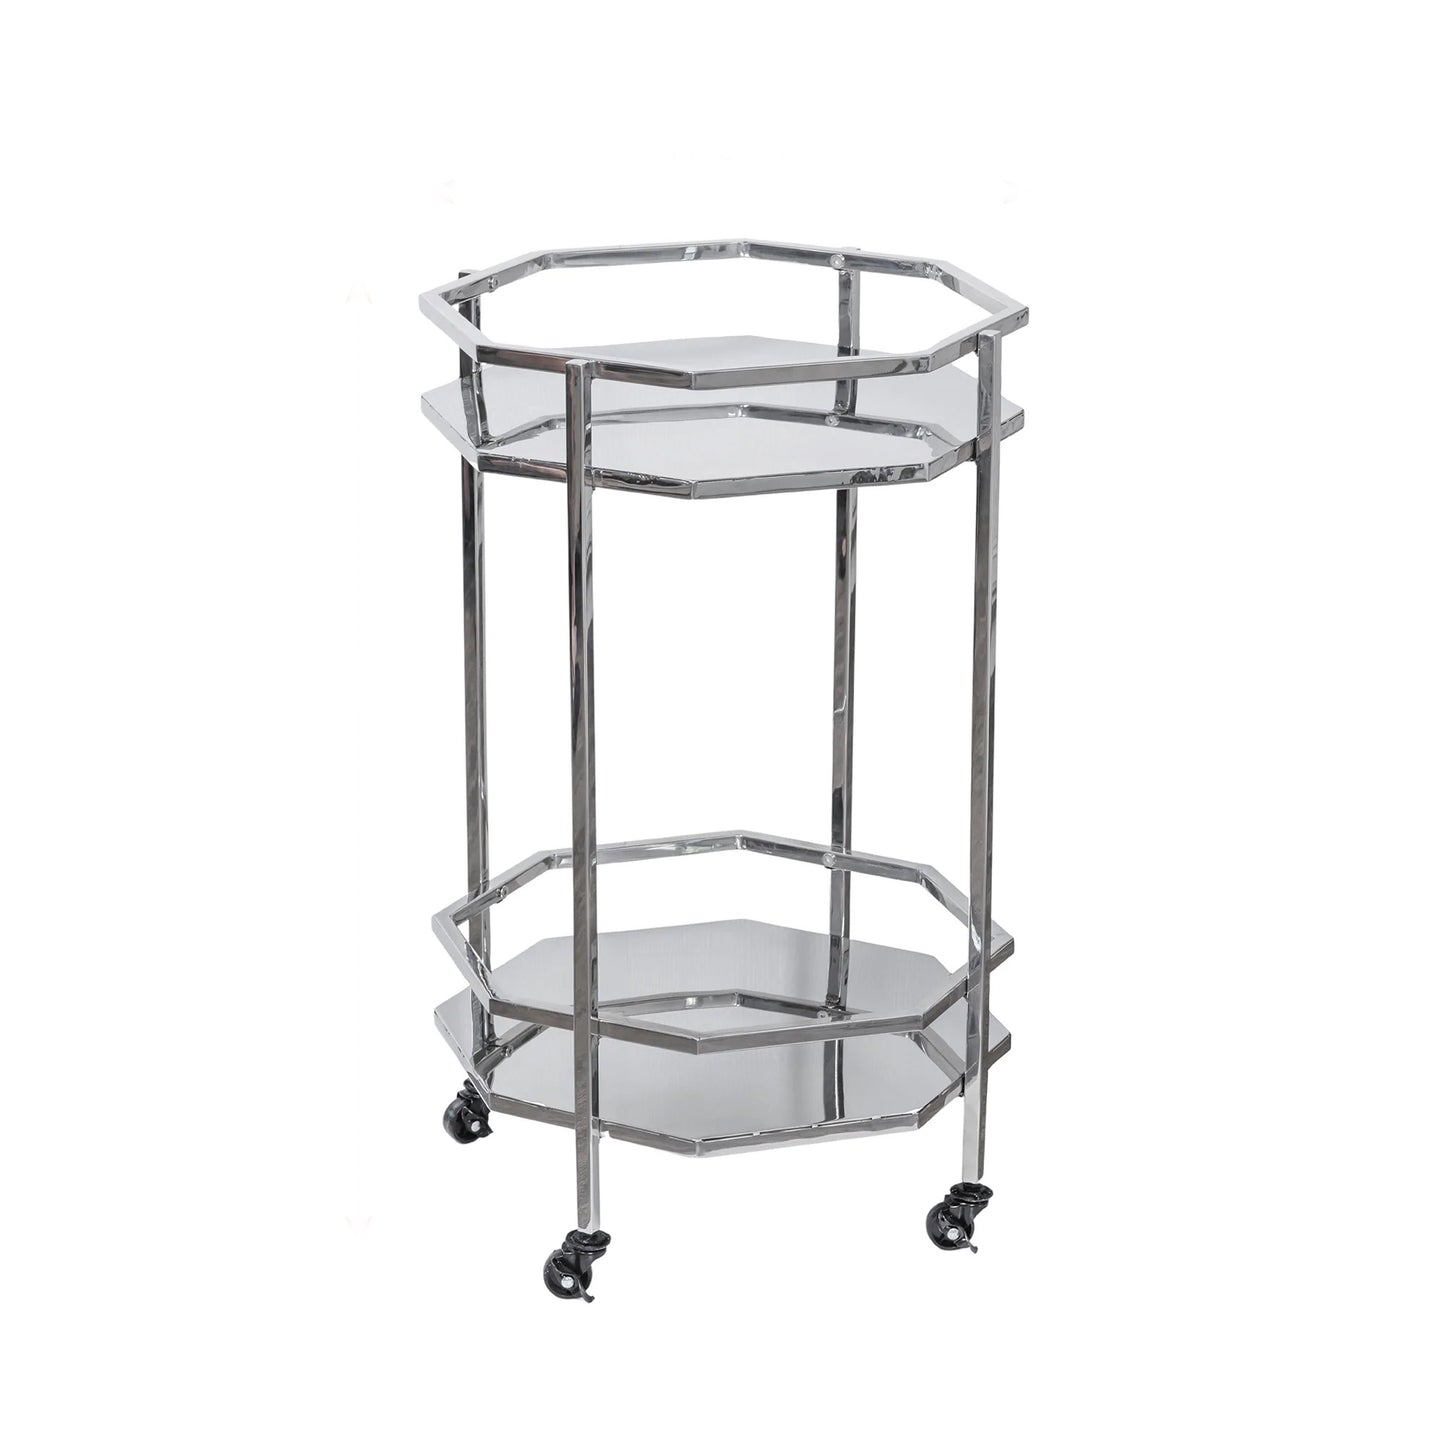 Silver rolling bar cart to use in the bar, kitchen, dining room, or patio for parties.  Hold wine, ice, drink bucket, or bar tools.